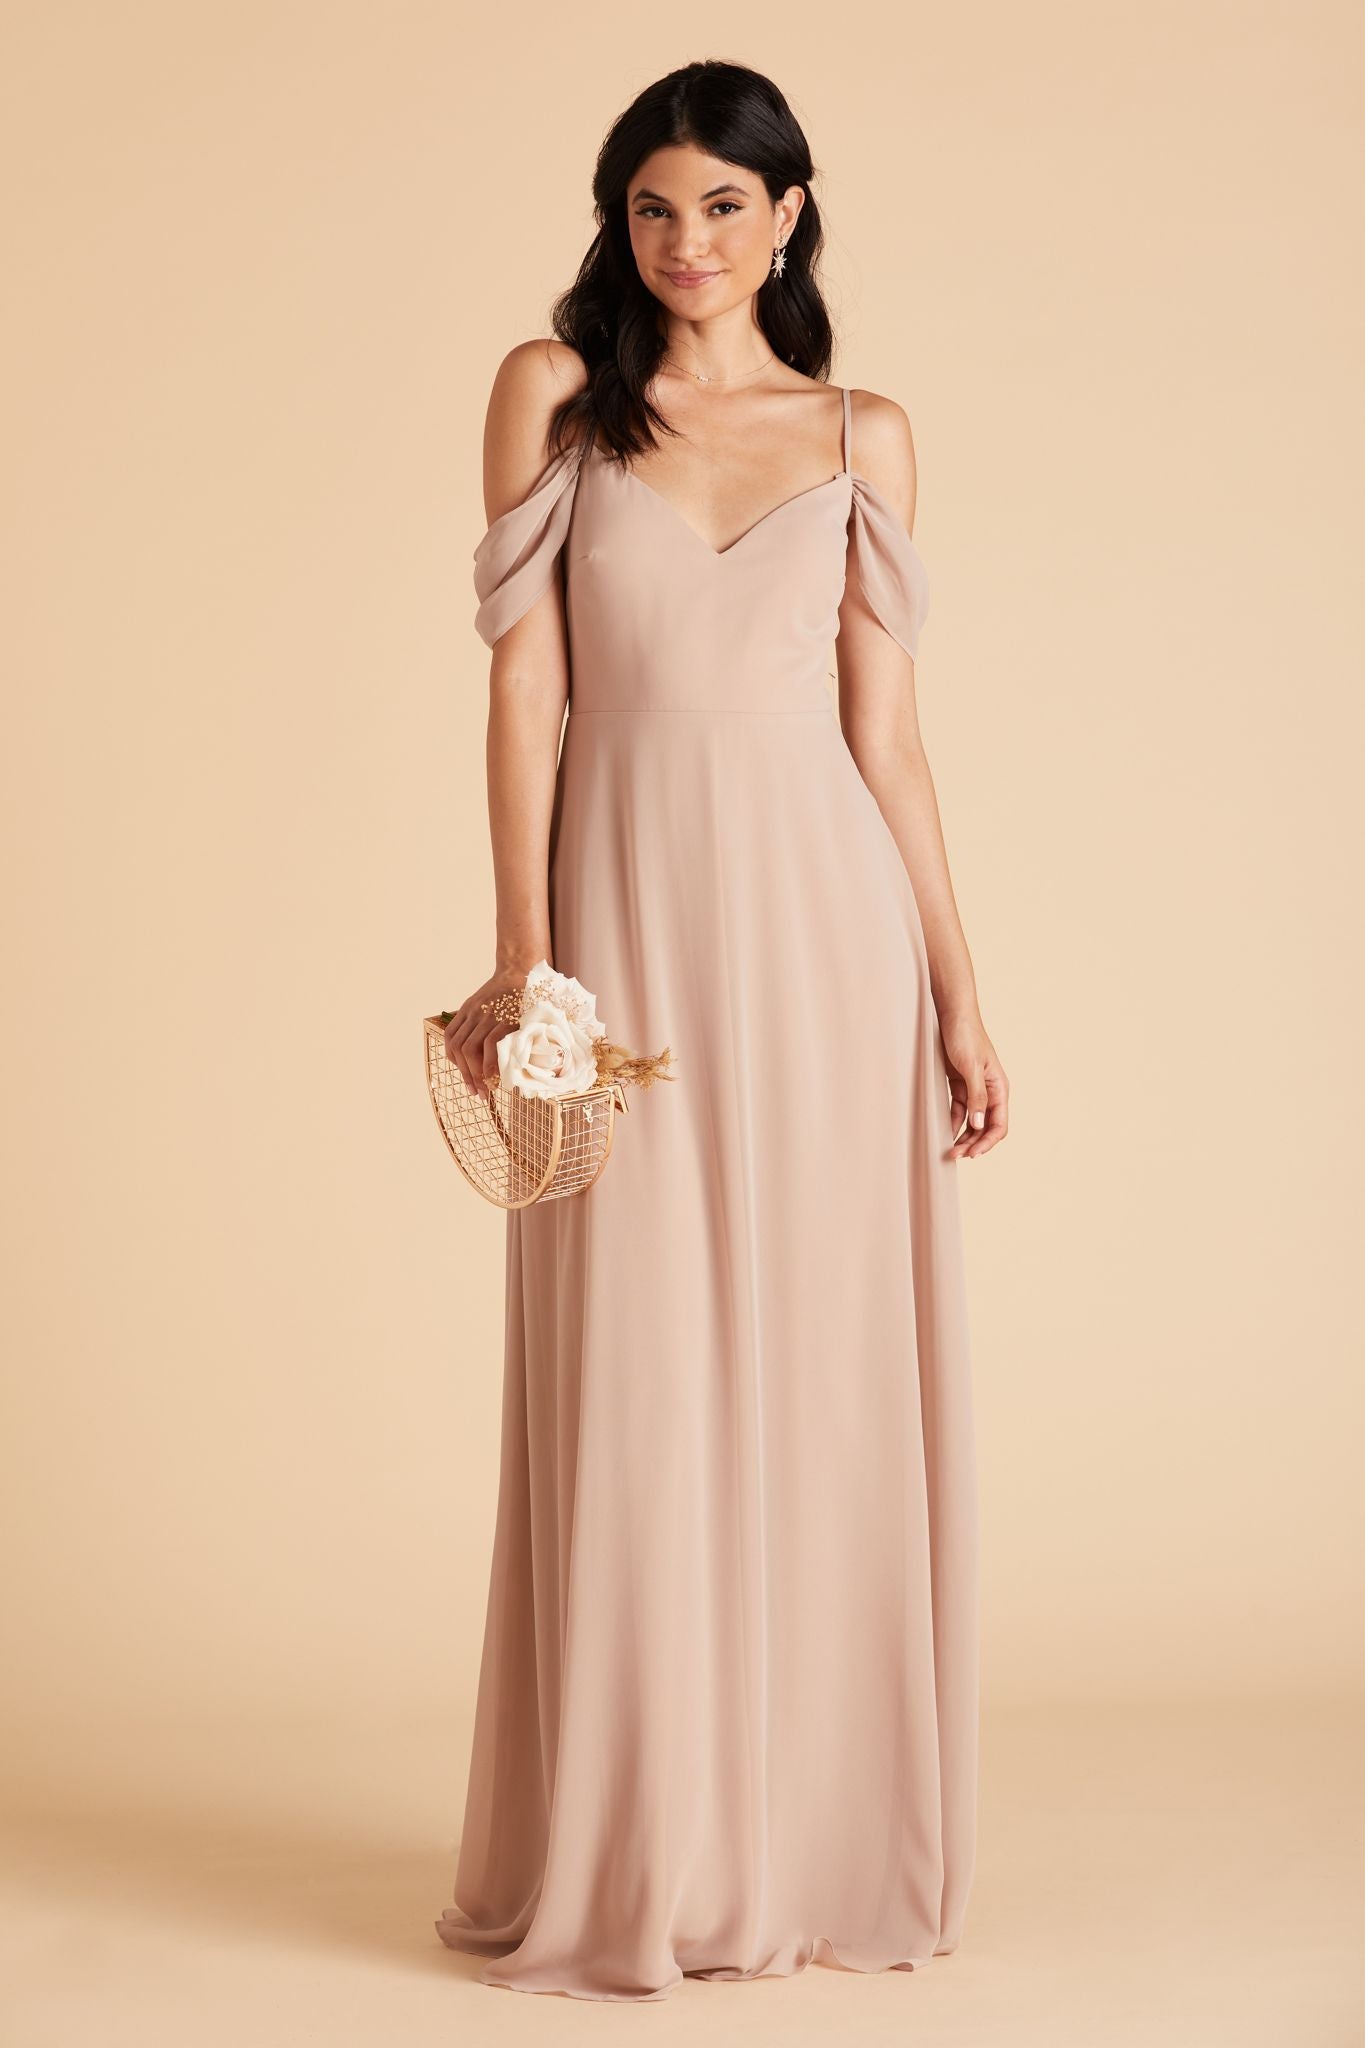 Front view of the Devin Convertible Dress in taupe chiffon worn by a slender model with a light skin tone. 